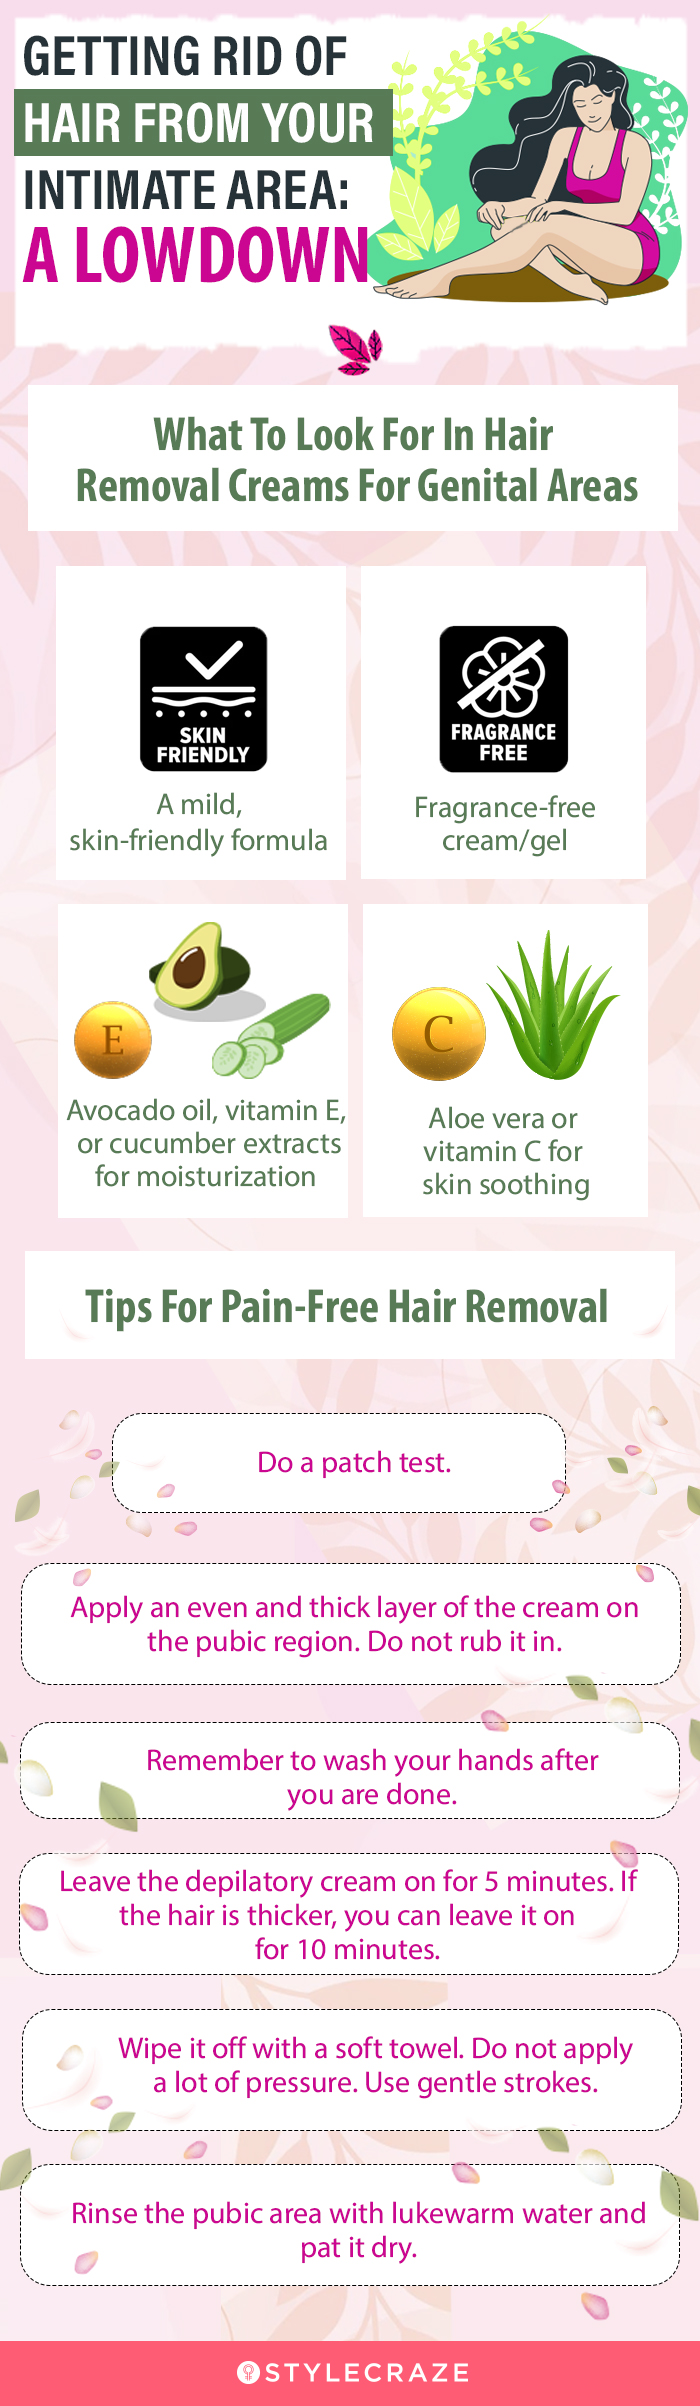 What To Look For In Hair Removal Creams For Genital Areas [infographic]